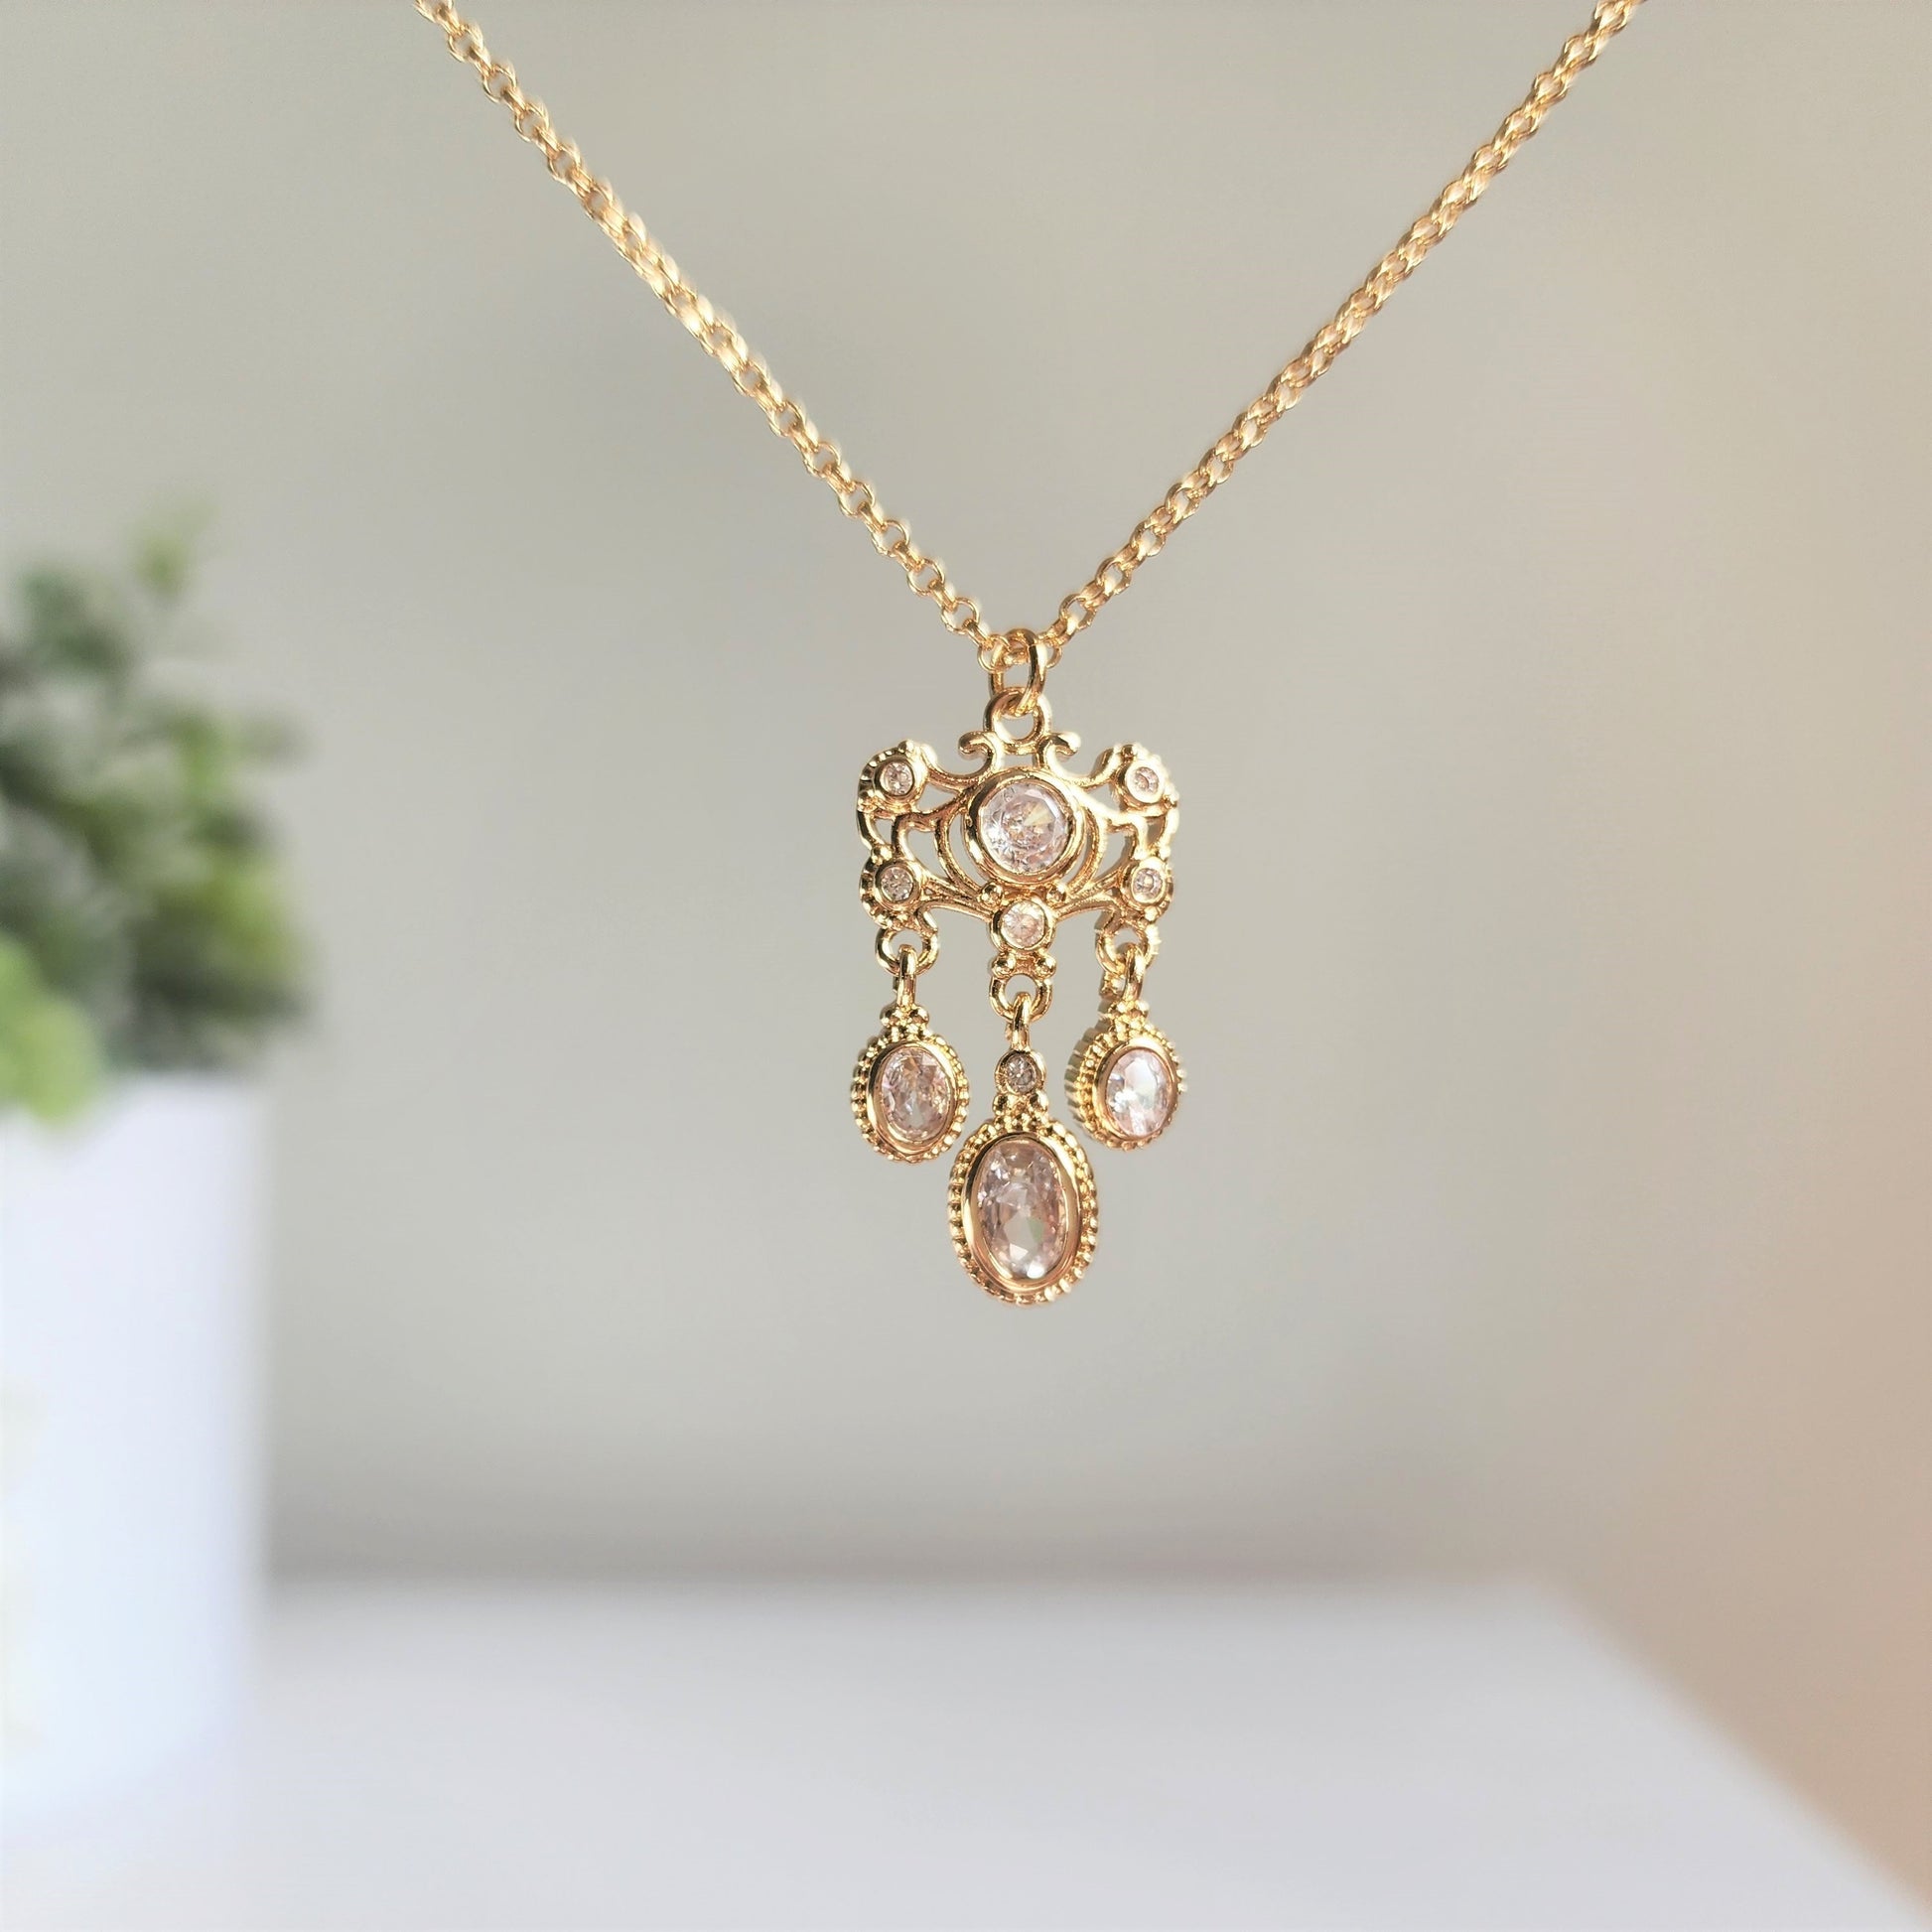 Chandelier pendent necklace, Cinderella inspired necklace, princess charm necklace, gift for her